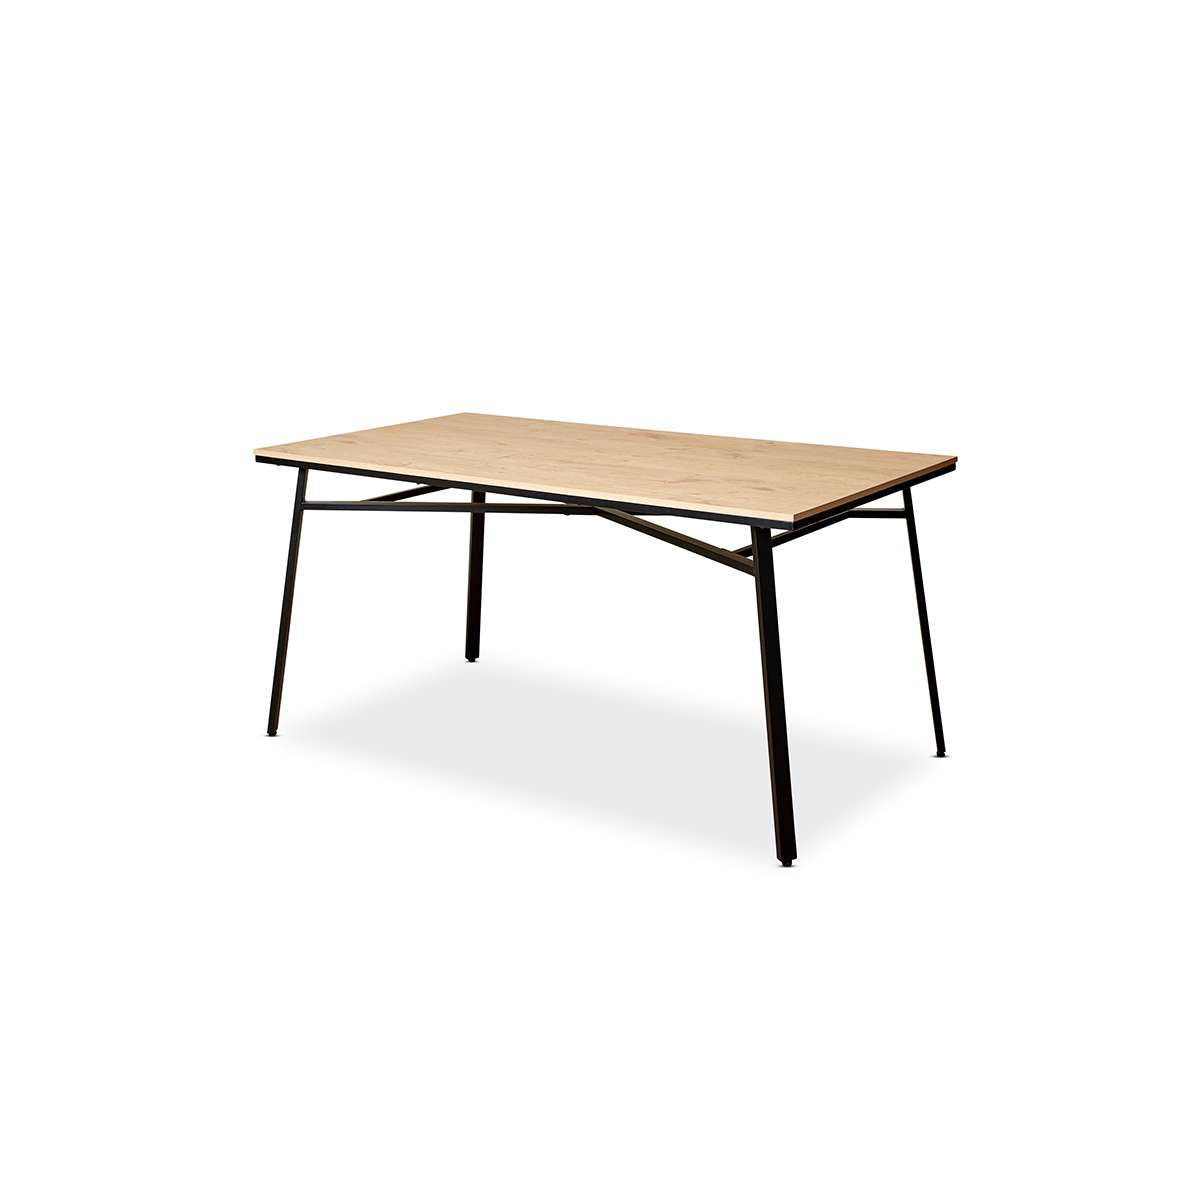 Reese 6 Seater Dining Table - Black